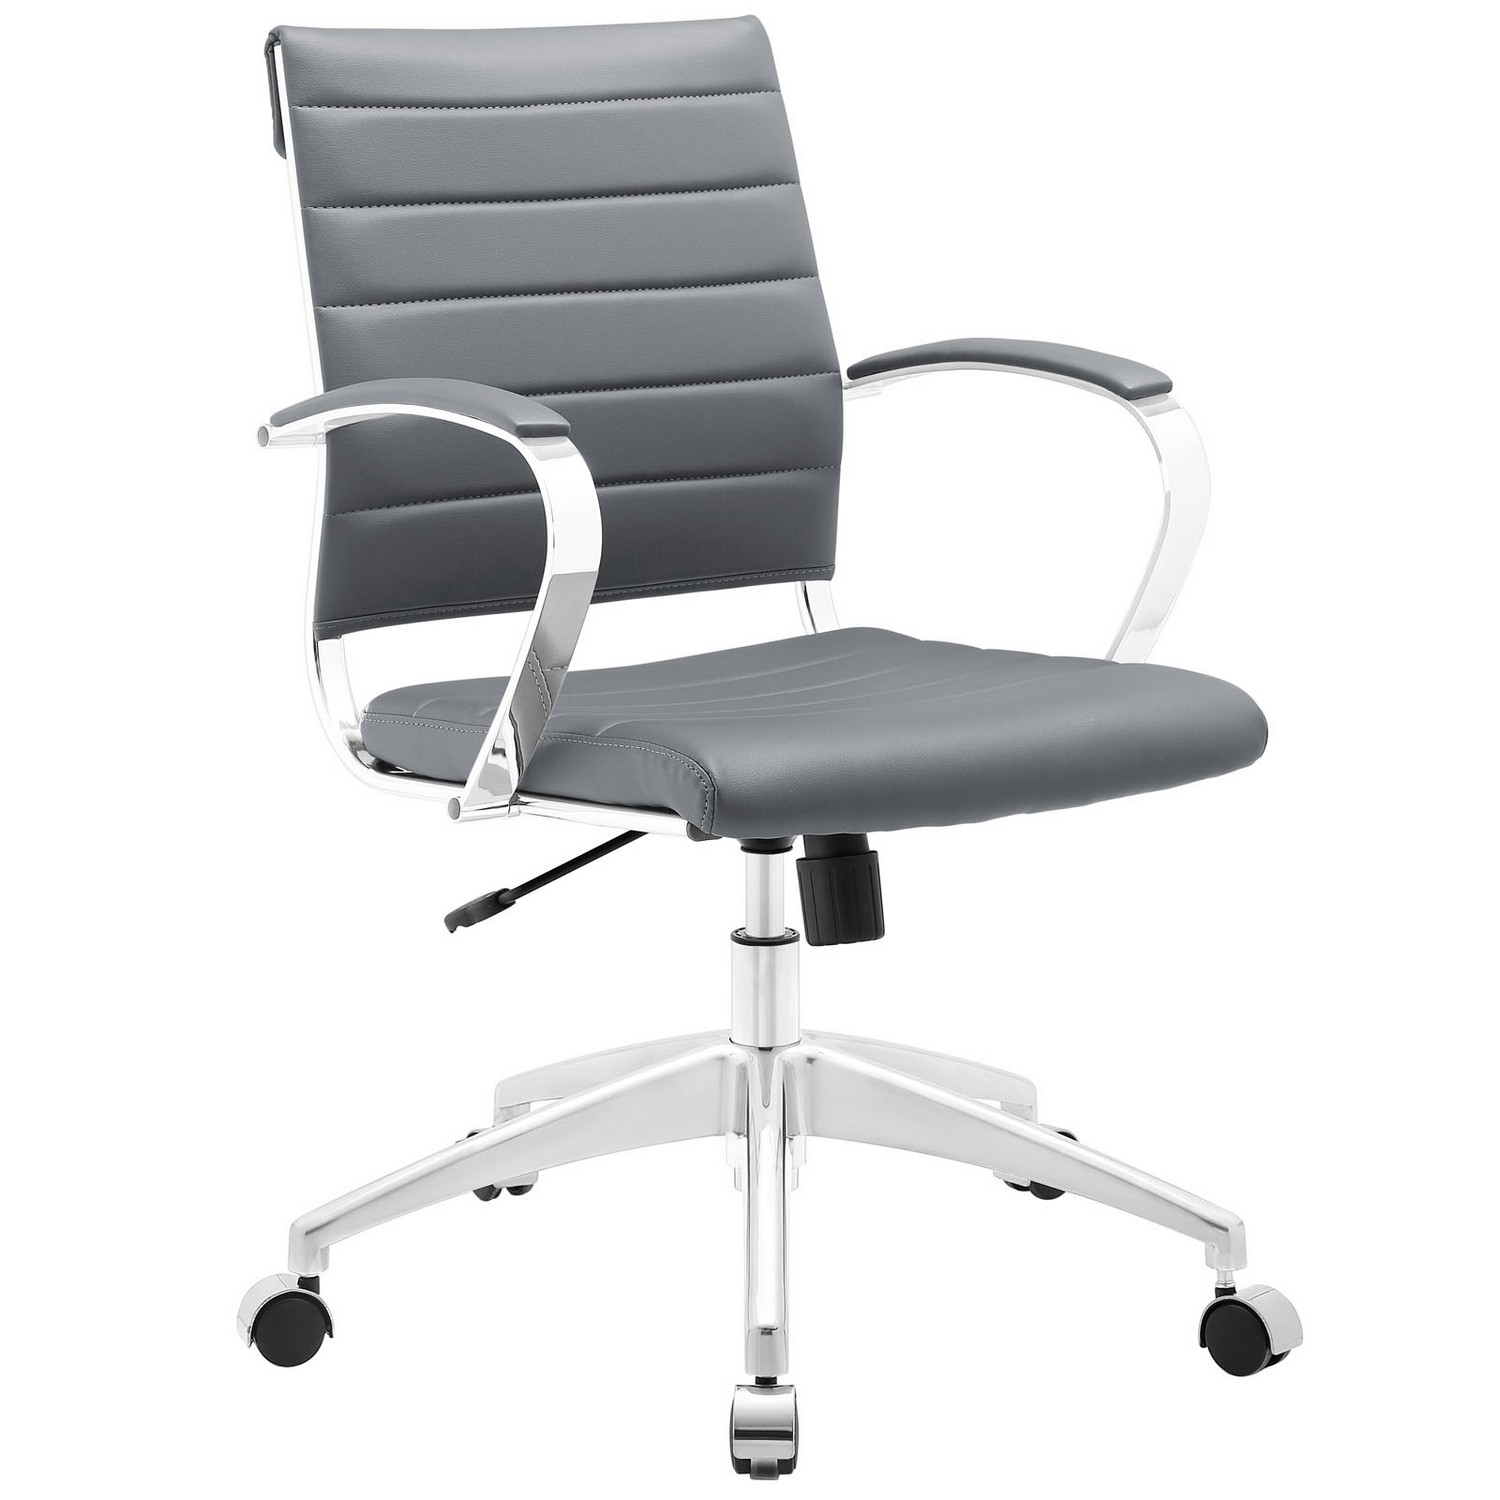 Modway Jive Mid Back Office Chair - Gray